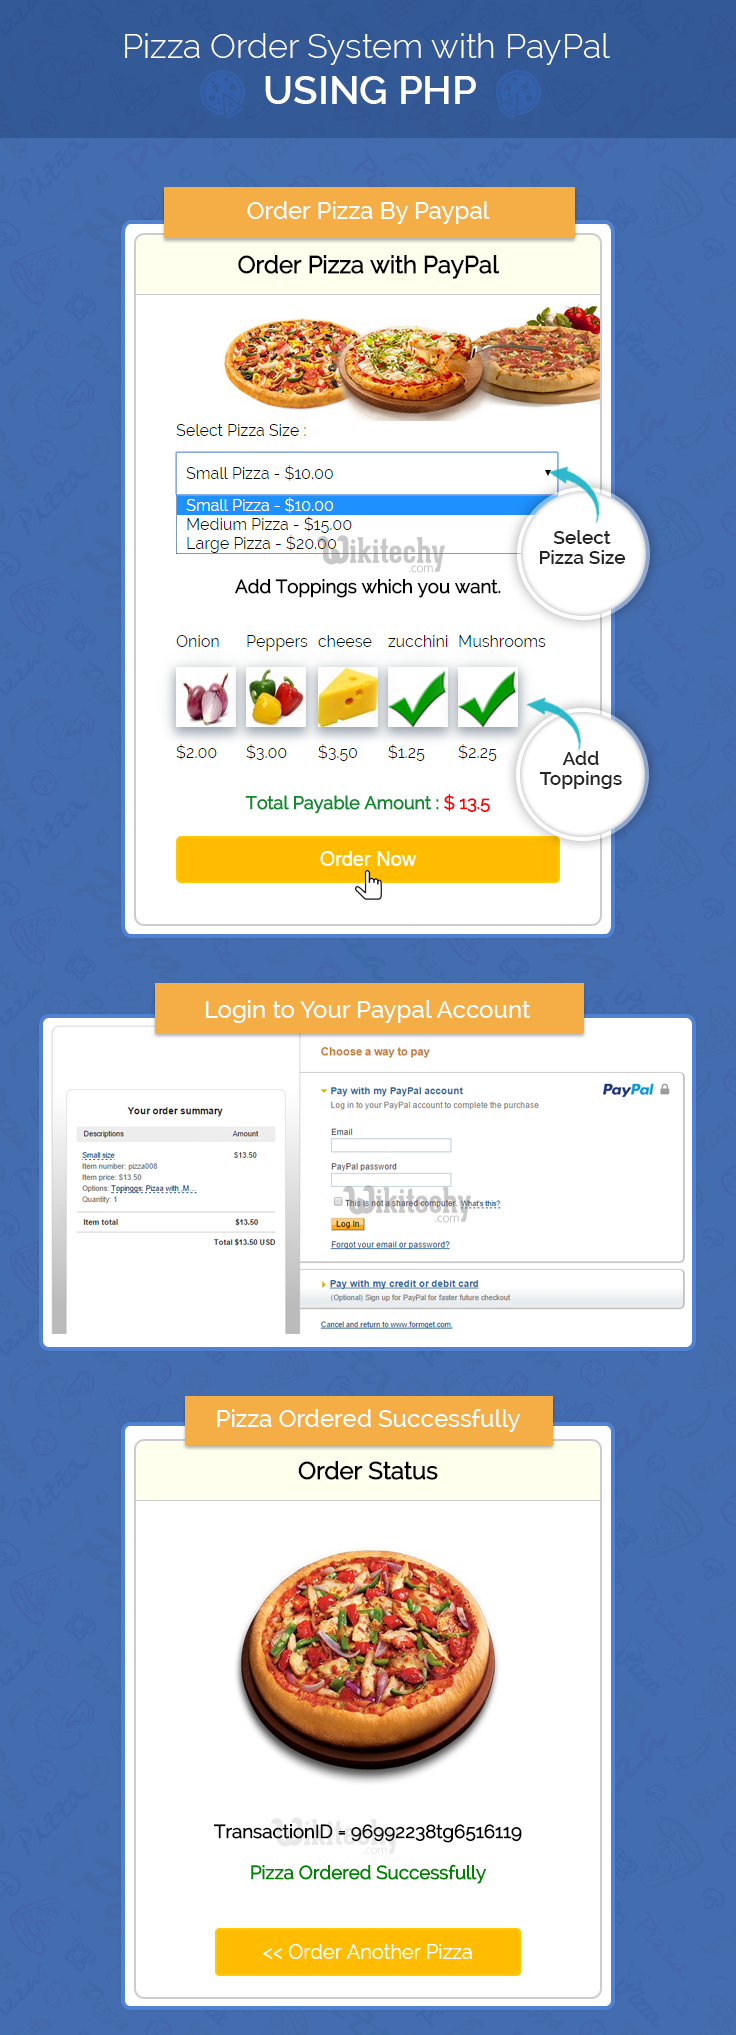 Online Shopping: Checkout faster, online deals - PayPal Indonesia